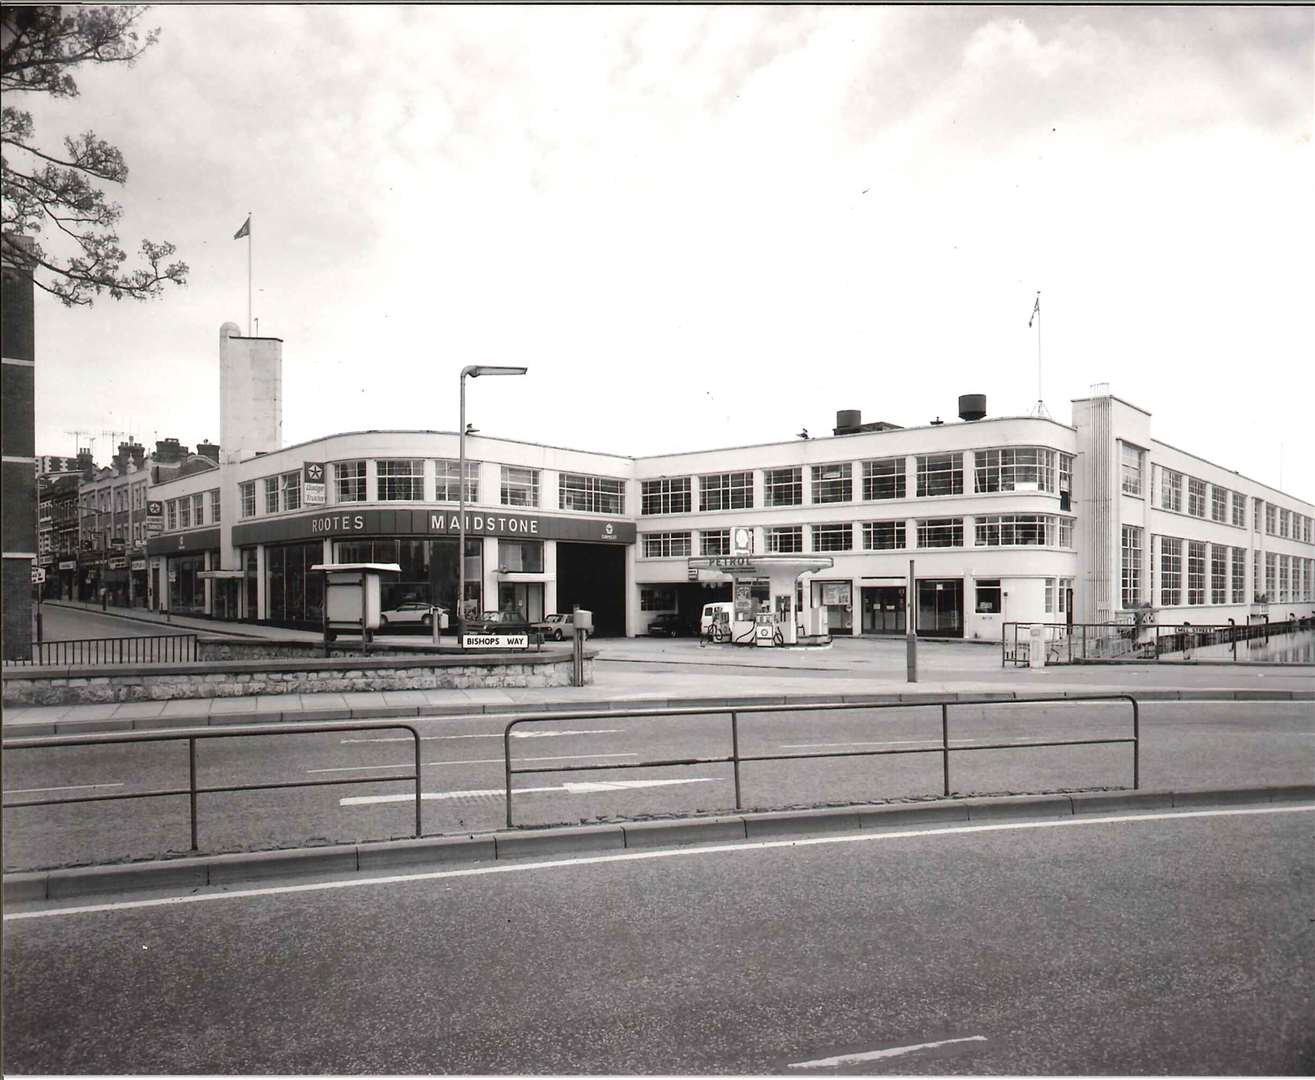 The Rootes building in the 1930s, complete with petrol pumping station